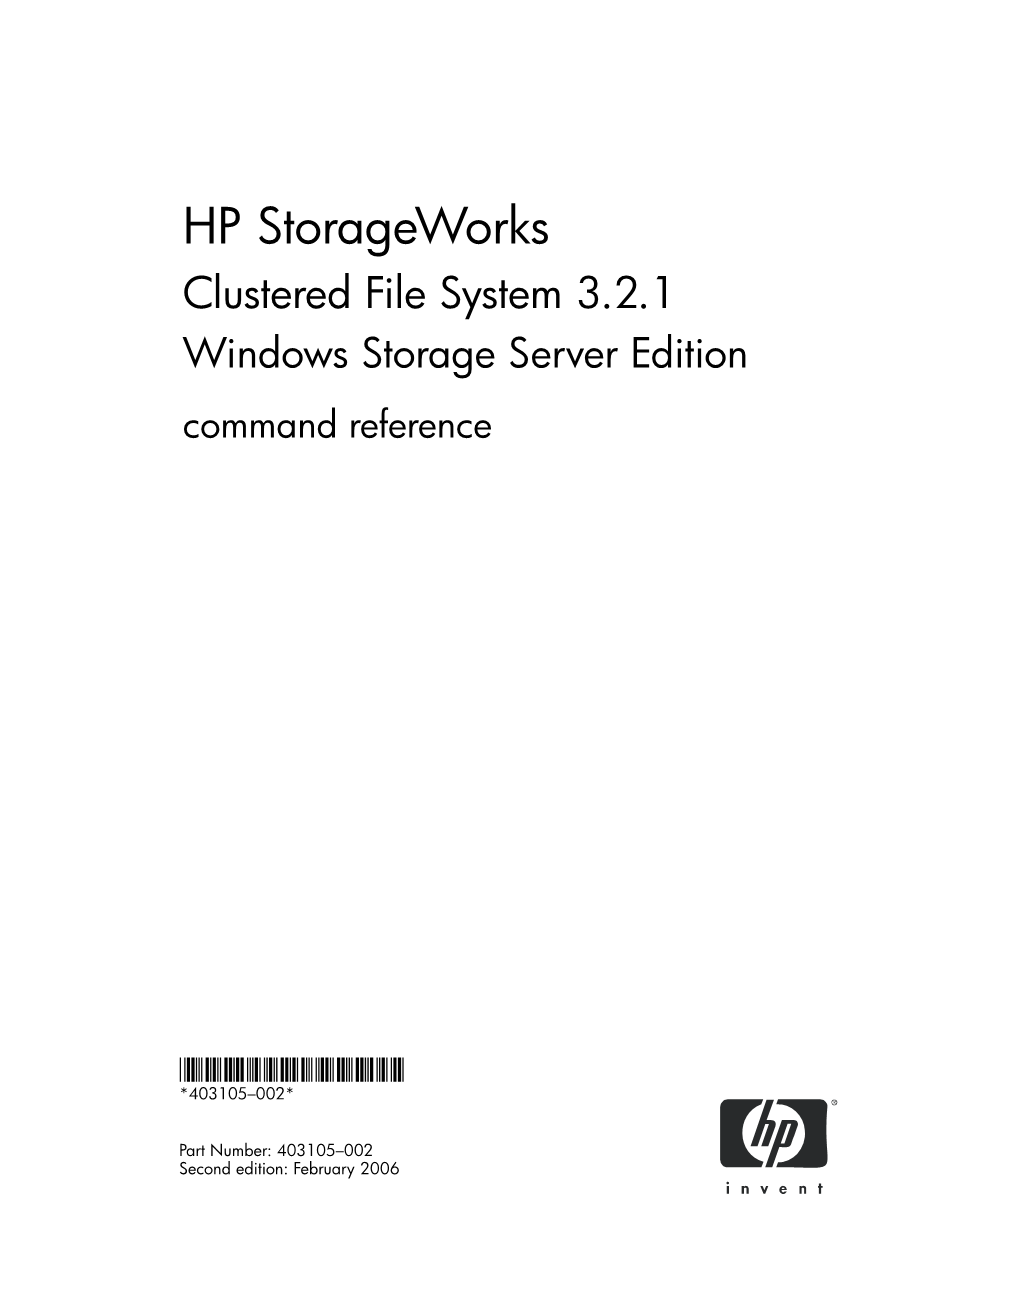 HP Storageworks Clustered File System 3.2.1 WSS Command